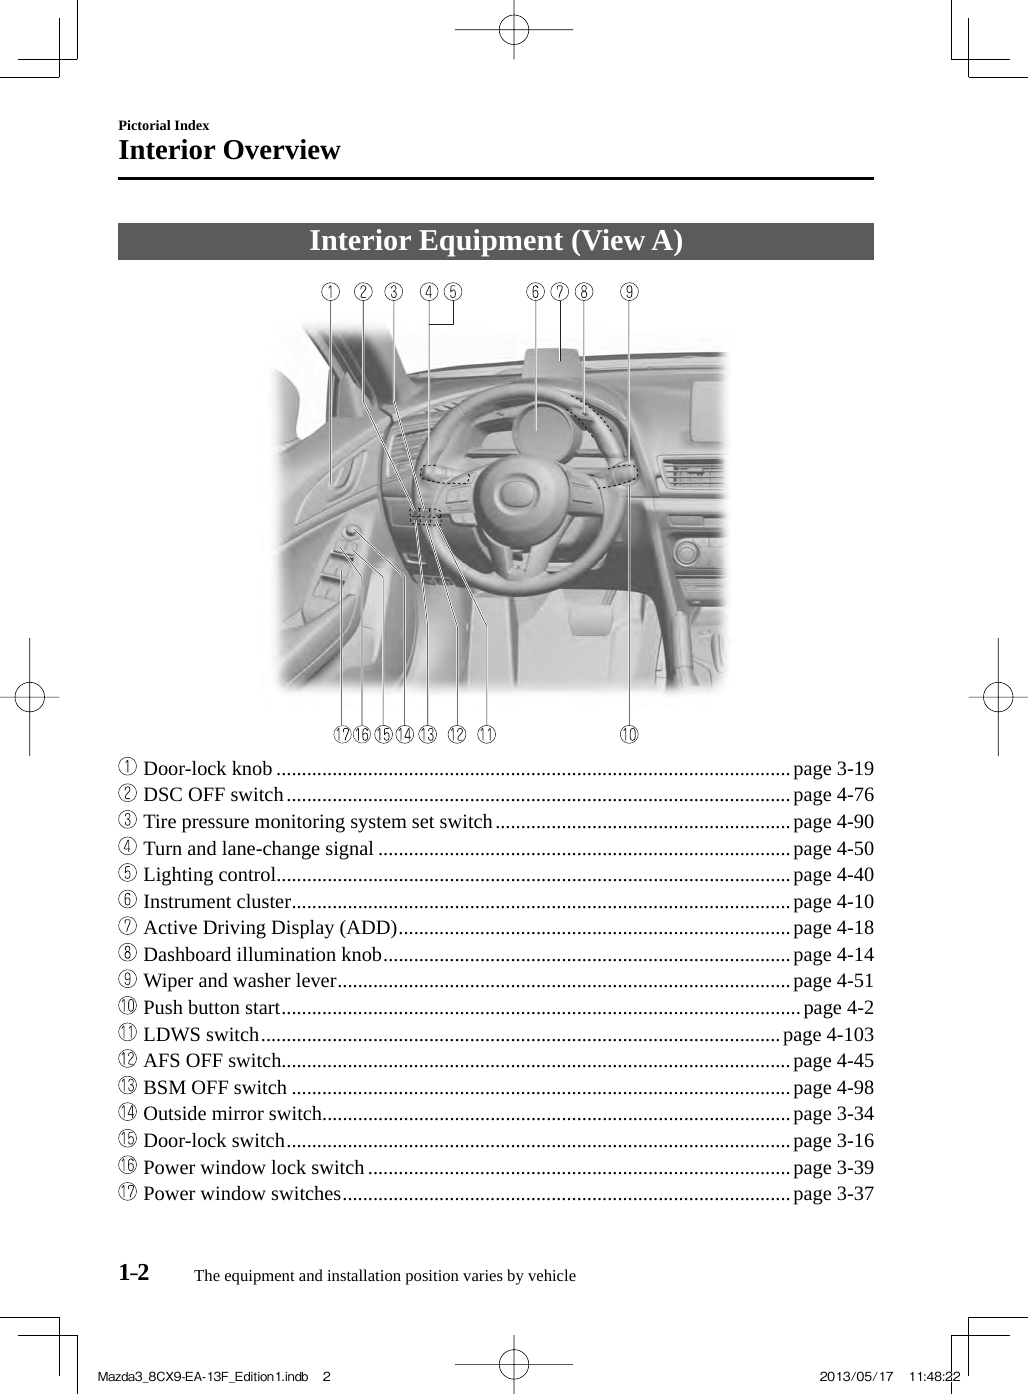 The equipment and installation position varies by vehiclePictorial IndexInterior Overview1–2     Interior  Equipment  (View  A)          Door-lock knob .....................................................................................................page  3-19     DSC OFF switch ...................................................................................................page  4-76     Tire pressure monitoring system set switch ..........................................................page  4-90     Turn and lane-change signal .................................................................................page  4-50     Lighting control.....................................................................................................page  4-40     Instrument cluster ..................................................................................................page  4-10     Active Driving Display (ADD) .............................................................................page  4-18     Dashboard illumination knob ................................................................................page  4-14     Wiper and washer lever .........................................................................................page  4-51     Push button start ......................................................................................................page  4-2     LDWS switch ......................................................................................................page  4-103     AFS OFF switch....................................................................................................page  4-45     BSM OFF switch ..................................................................................................page  4-98     Outside mirror switch............................................................................................page  3-34     Door-lock switch ...................................................................................................page  3-16     Power window lock switch ...................................................................................page  3-39     Power window switches ........................................................................................page  3-37 Mazda3_8CX9-EA-13F_Edition1.indb   2Mazda3_8CX9-EA-13F_Edition1.indb   2 2013/05/17   11:48:222013/05/17   11:48:22